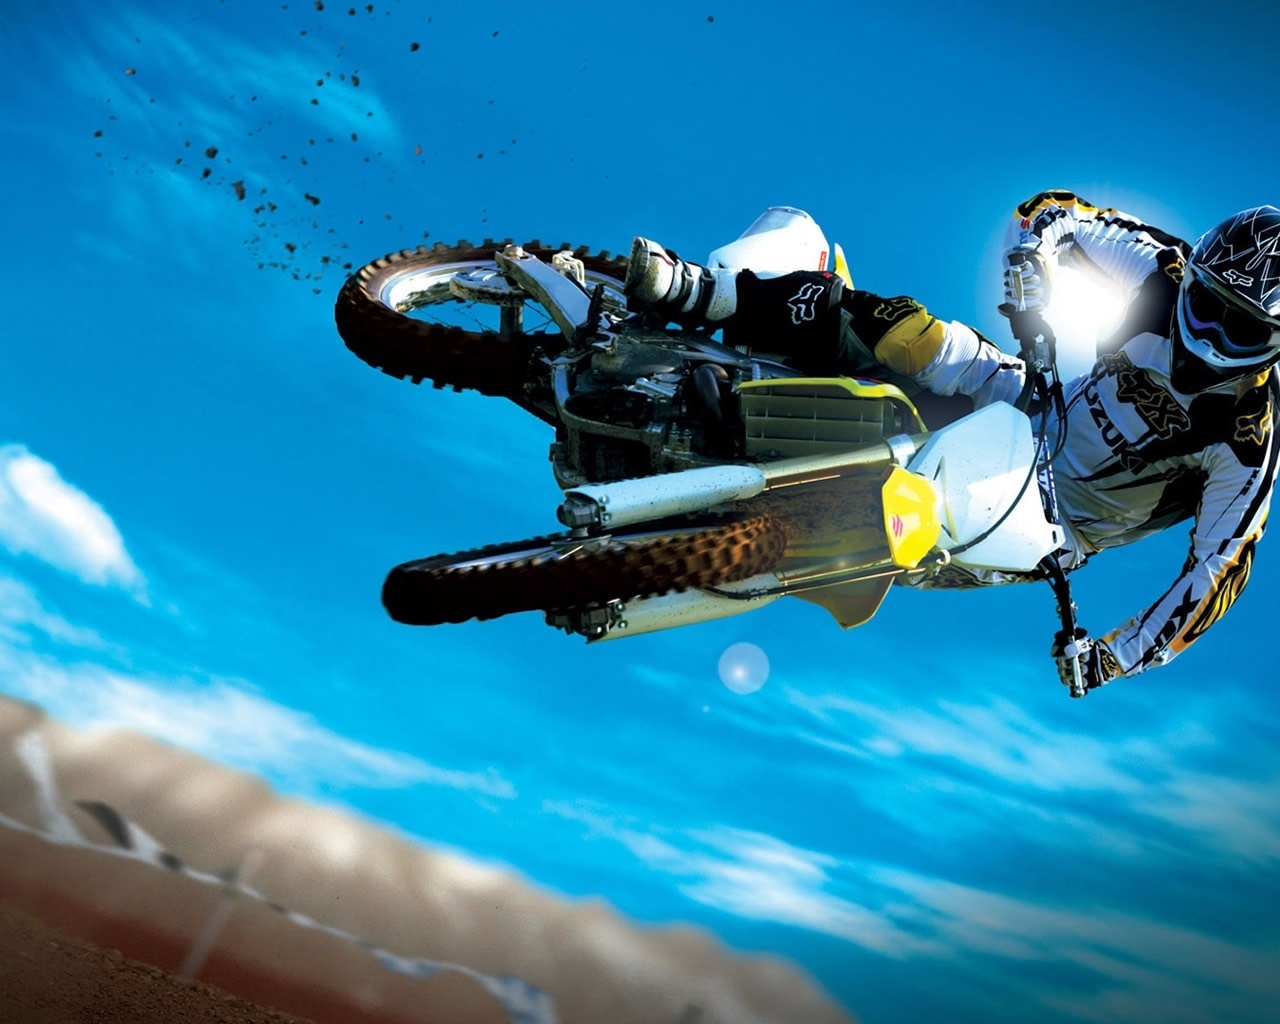 Moto Extreme Sport for 1280 x 1024 resolution